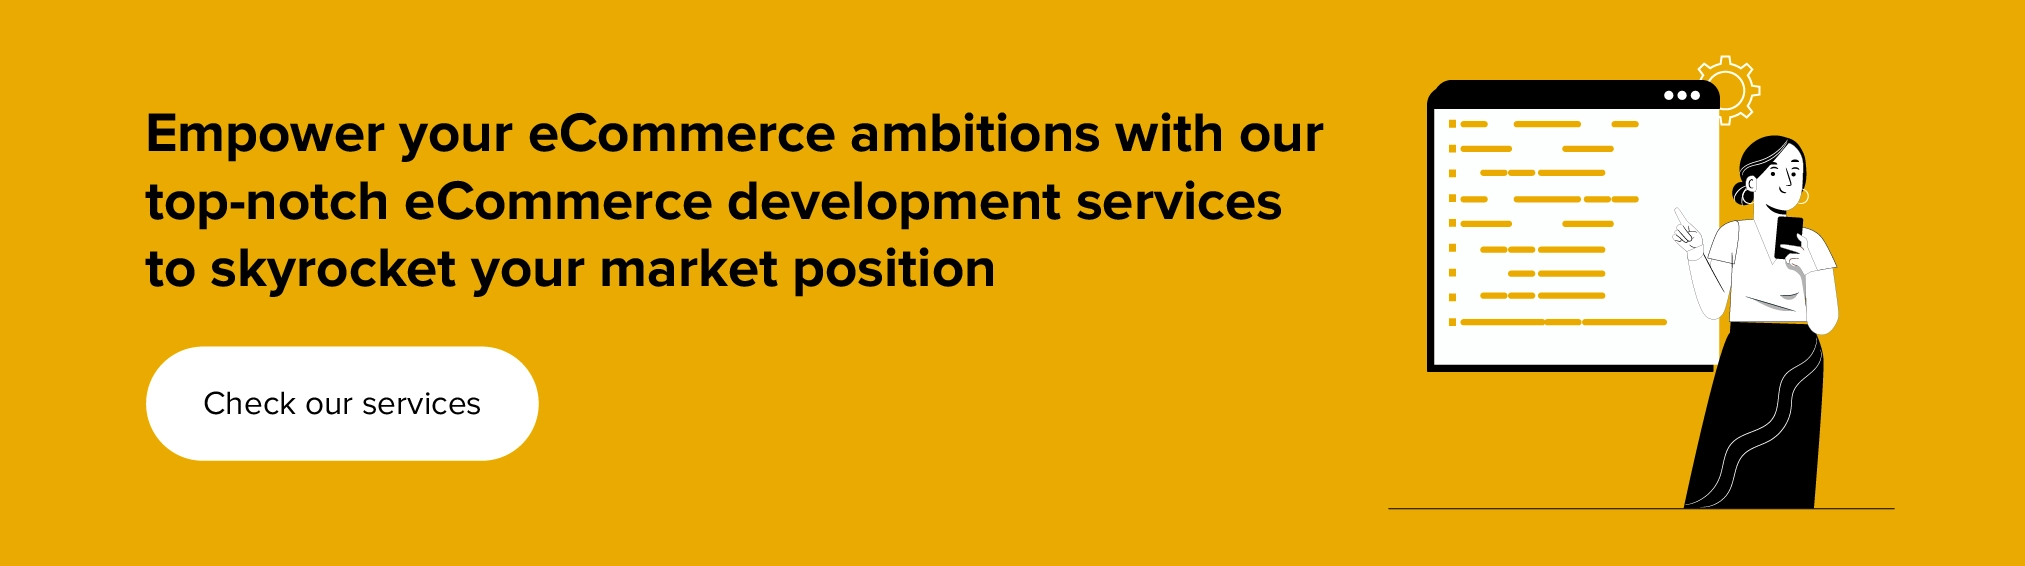 Empower your eCommerce ambitions with our top-notch eCommerce development services